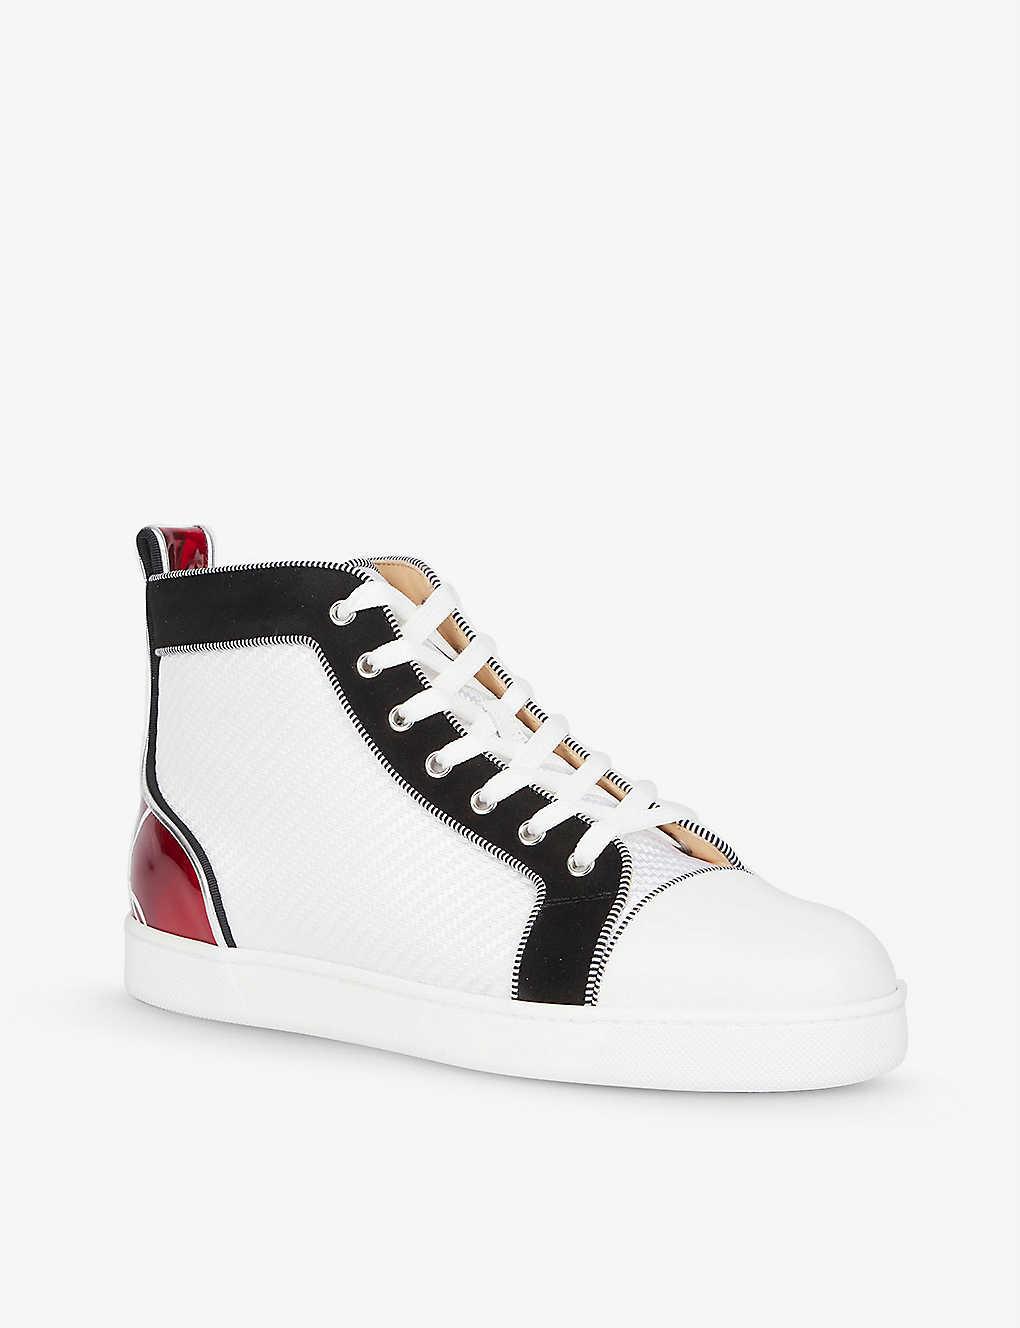 Pin by نوسة سهام on Chaussures  Casual shoes, Christian louboutin shoes  mens, Fashion shoes